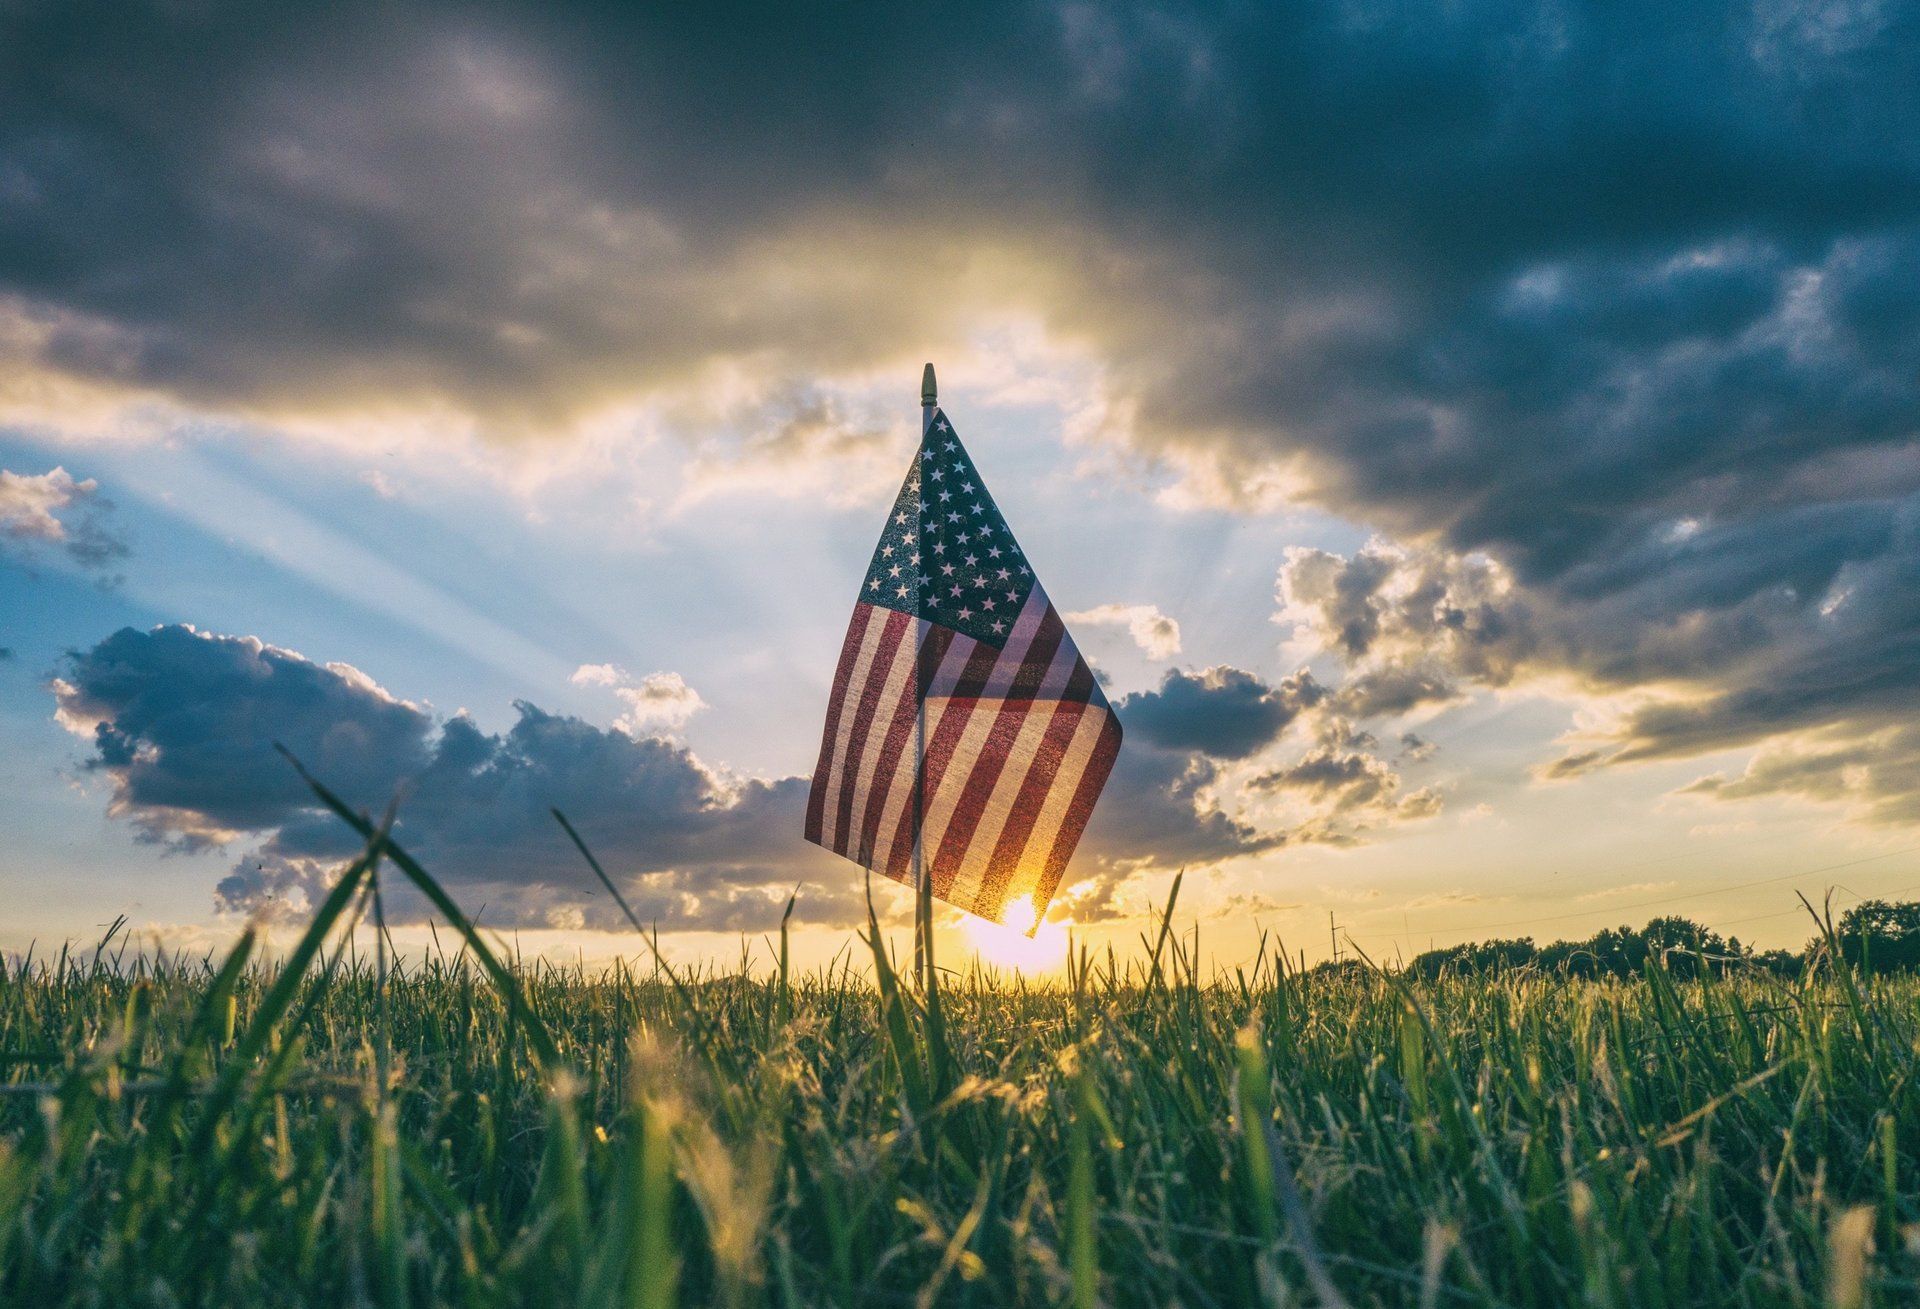 long island funeral home, long island veteran, american flag, america, salute to service, lic cremation service, long island cheapest cremation, direct cremation, direct burial